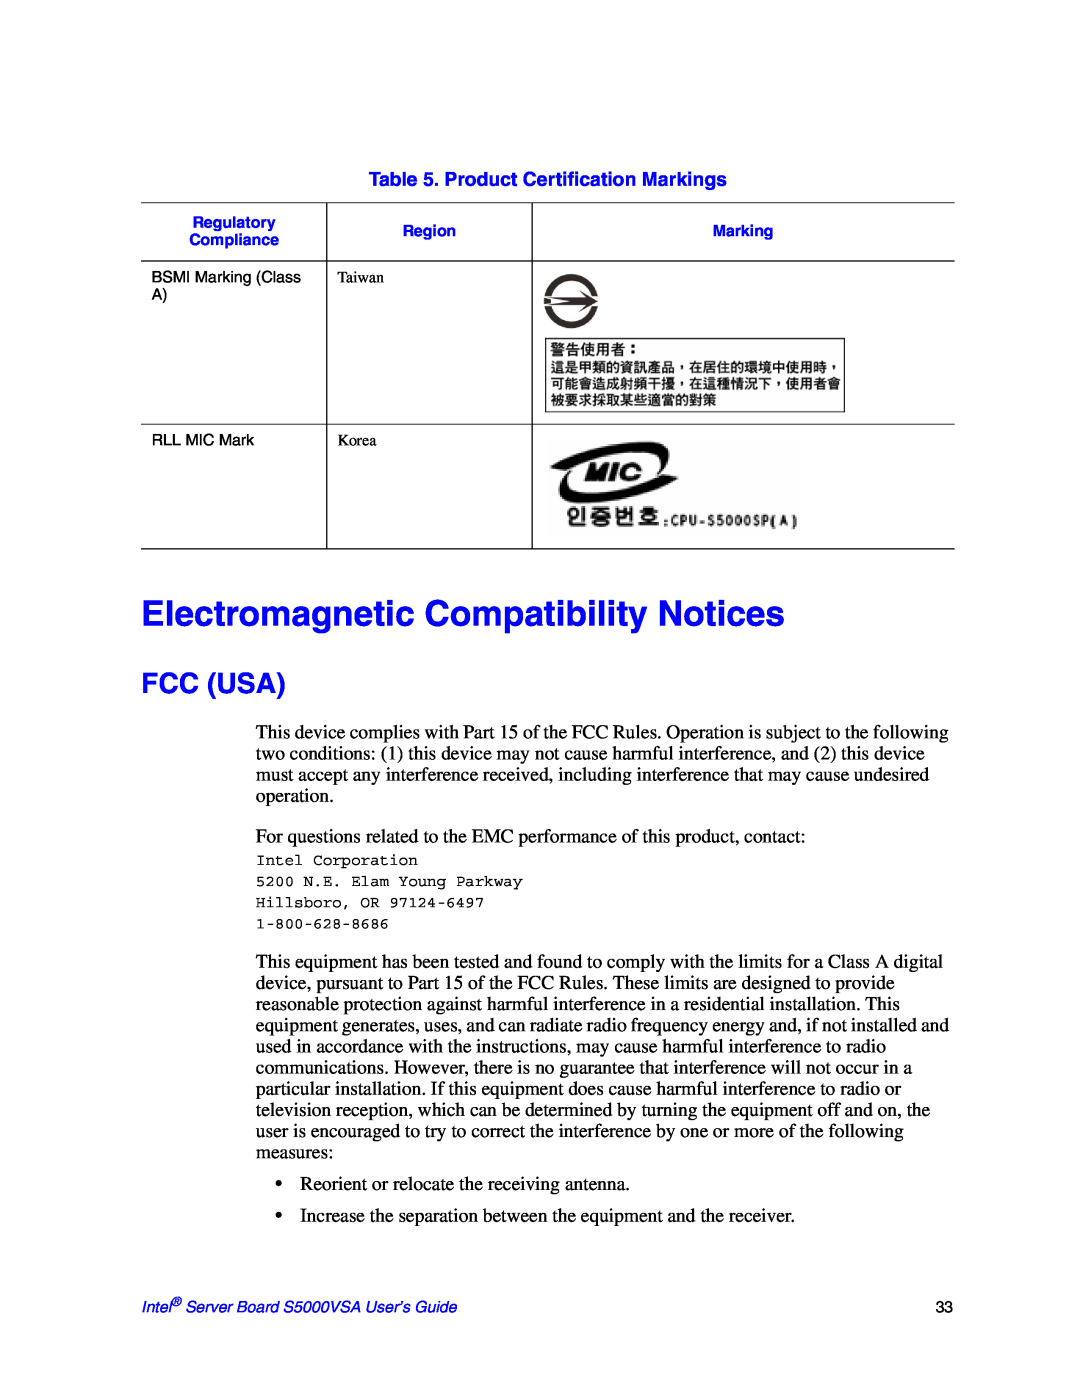 Intel S5000VSA manual Electromagnetic Compatibility Notices, Fcc Usa, Product Certification Markings 